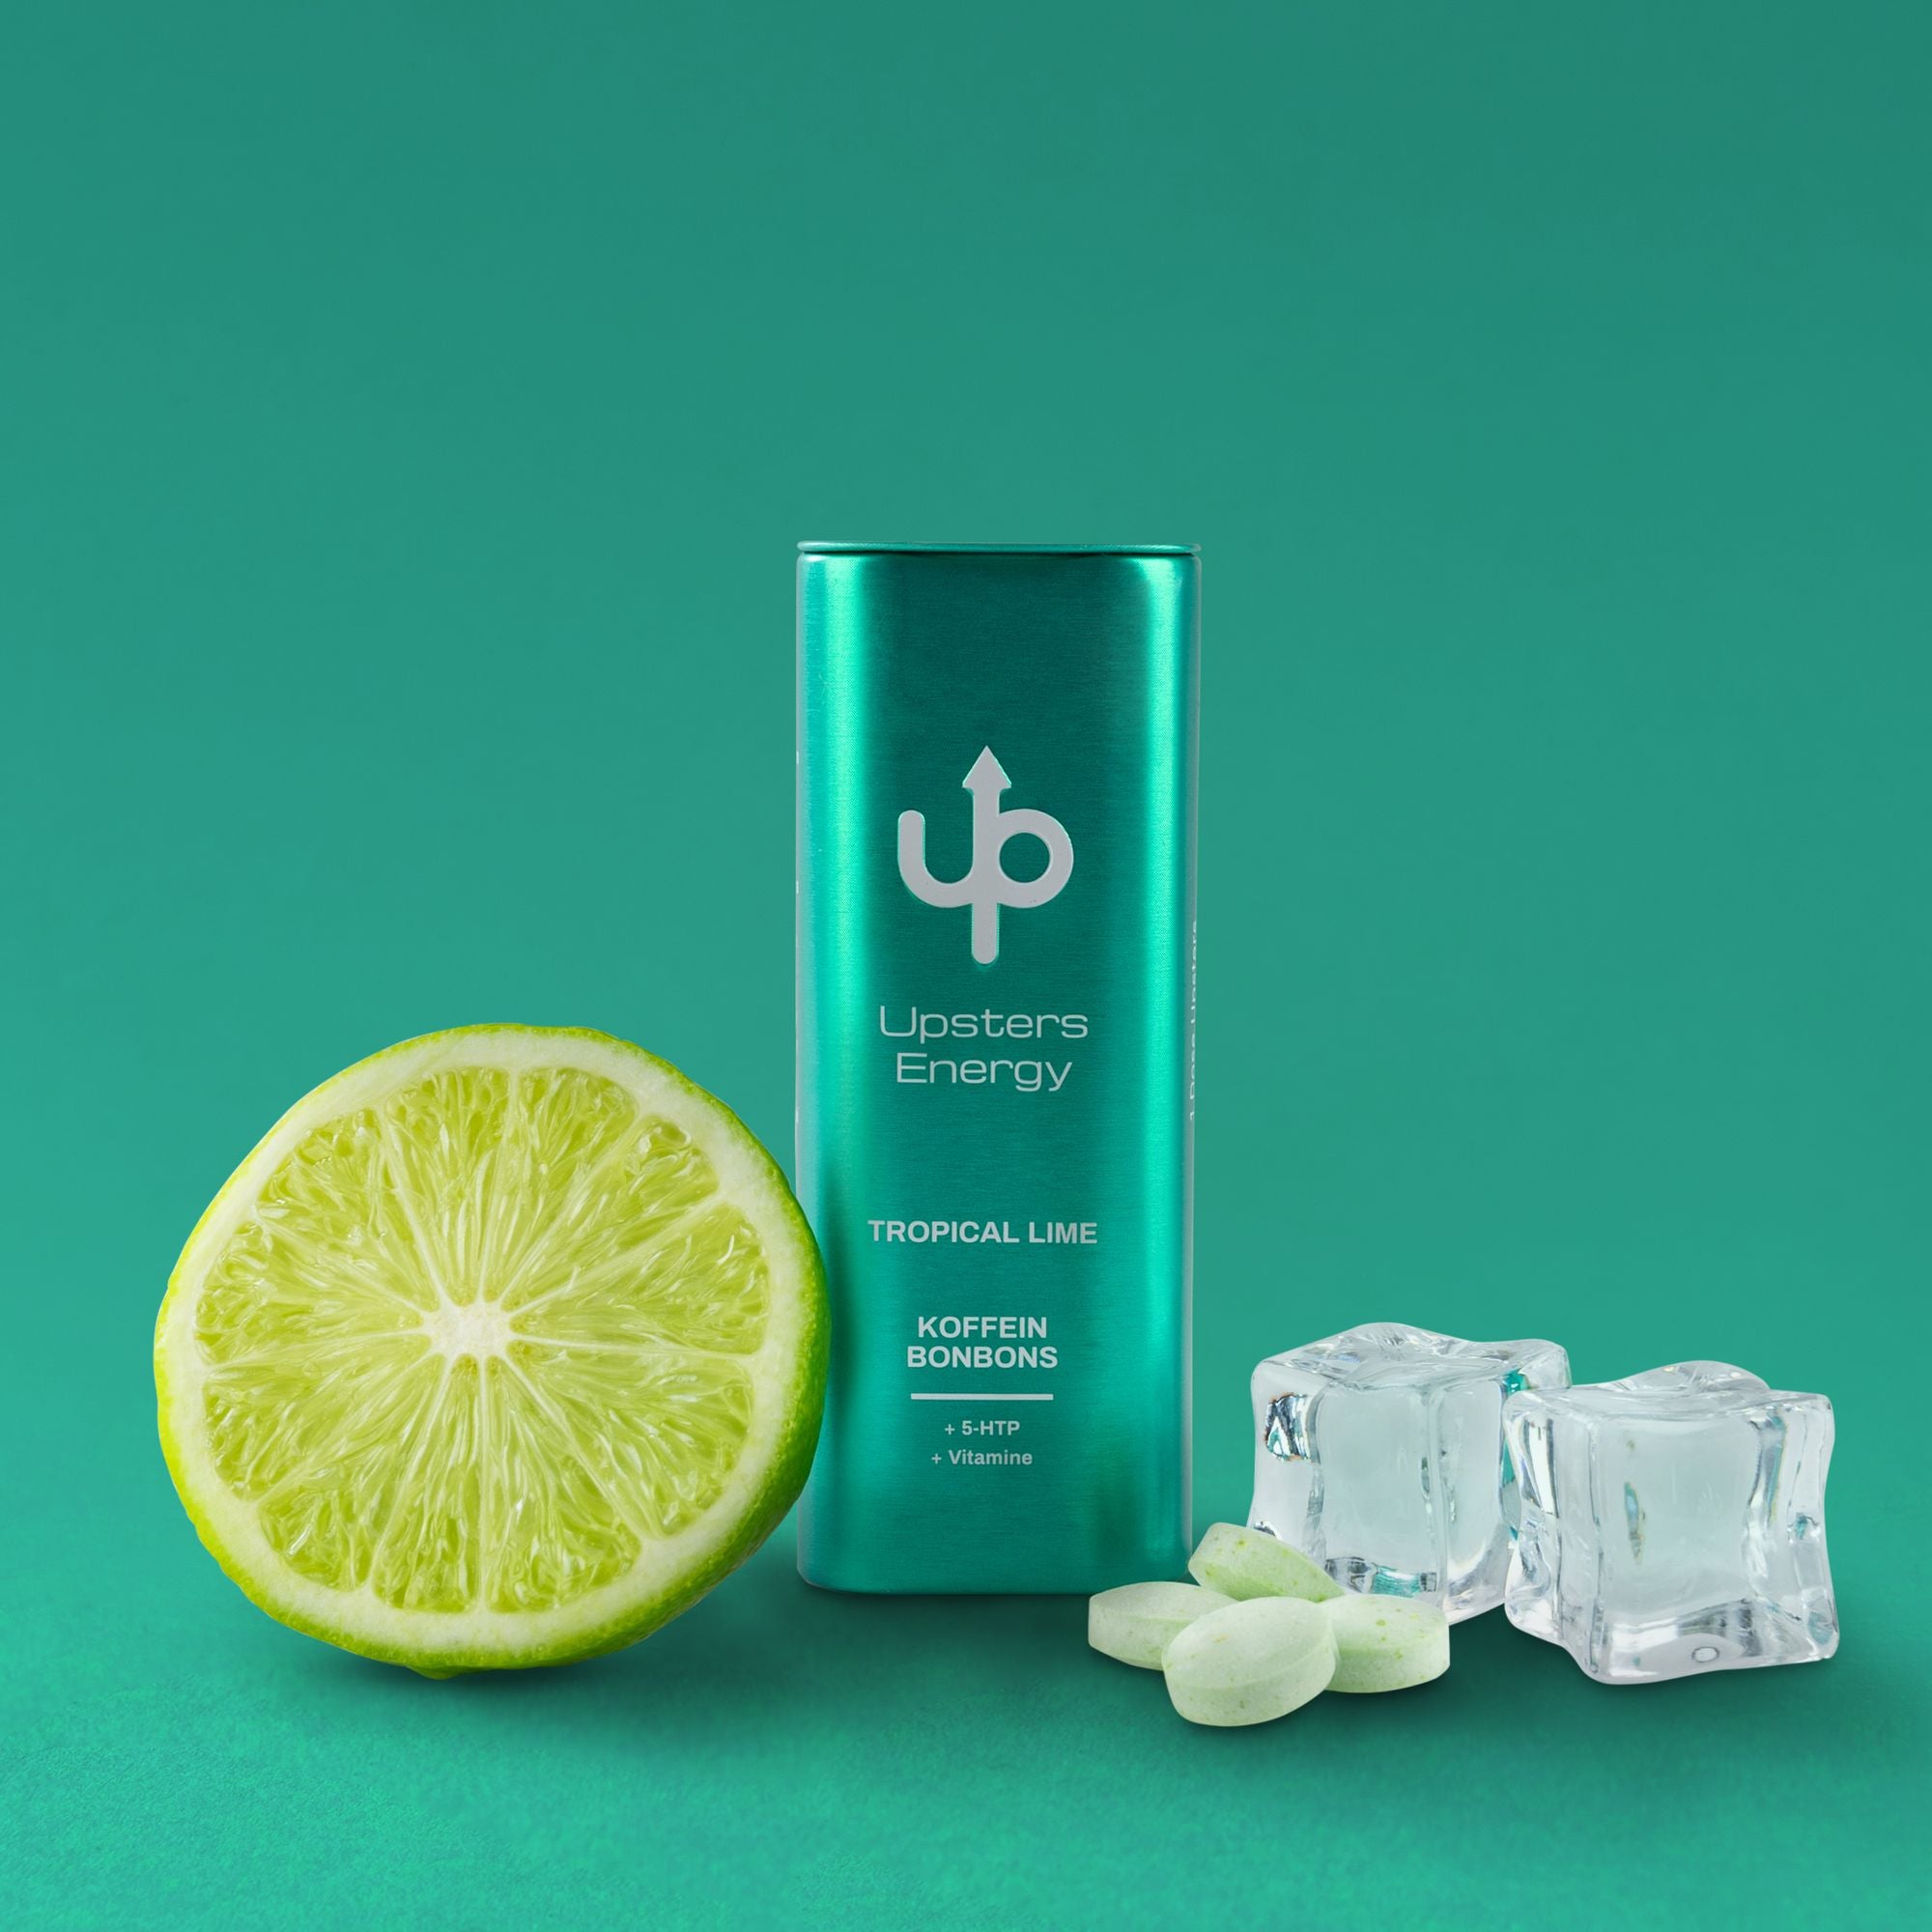 upsters - Tropical Lime